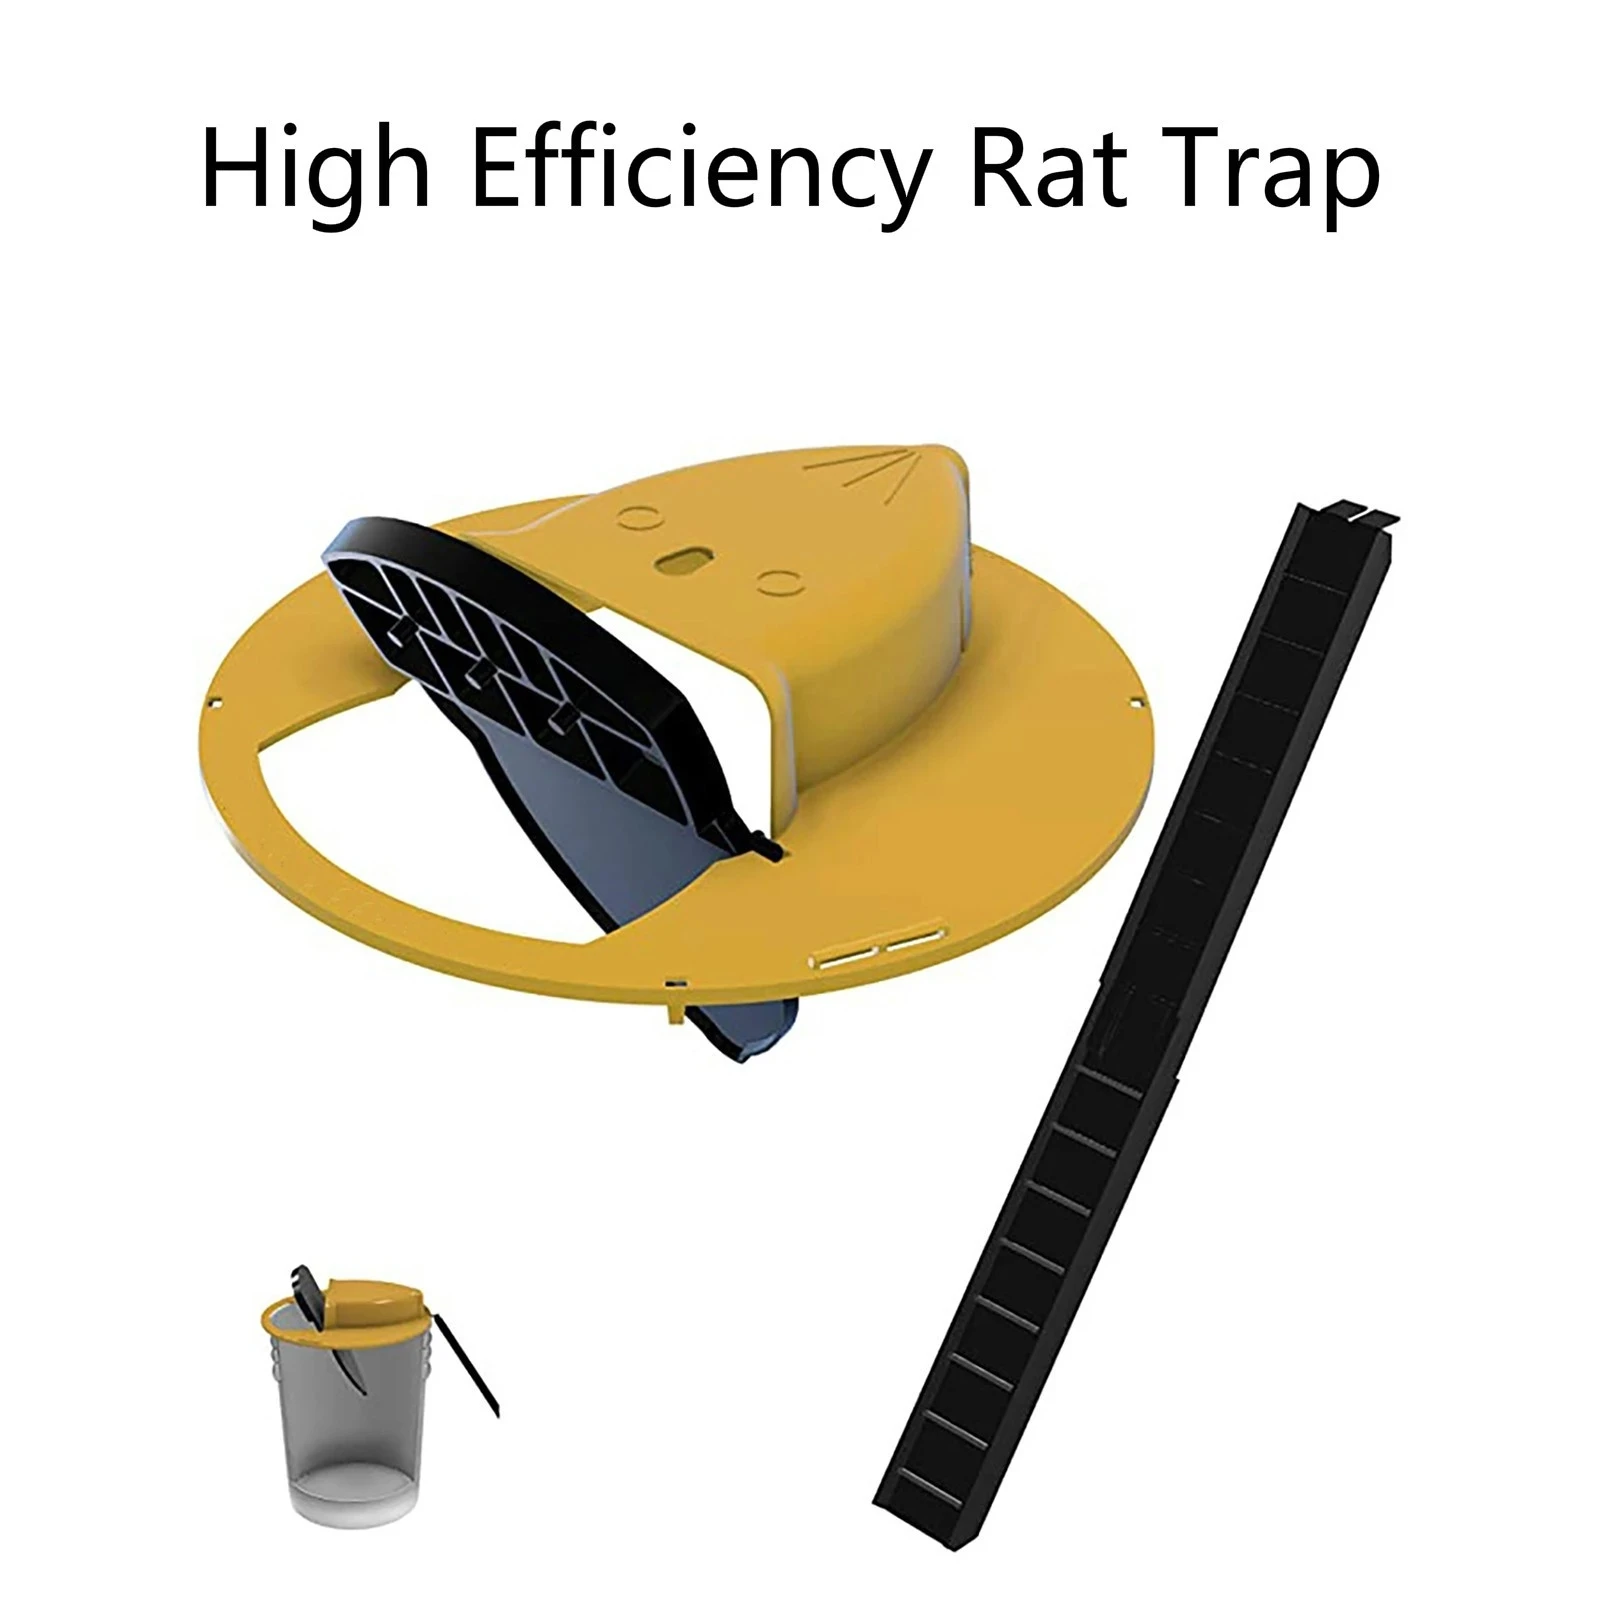 

Reusable Smart Flip and Slide Bucket Lid Mouse trap Humane Or Lethal Trap Auto Reset Rat Door Style Multi Catch Dropship Hot